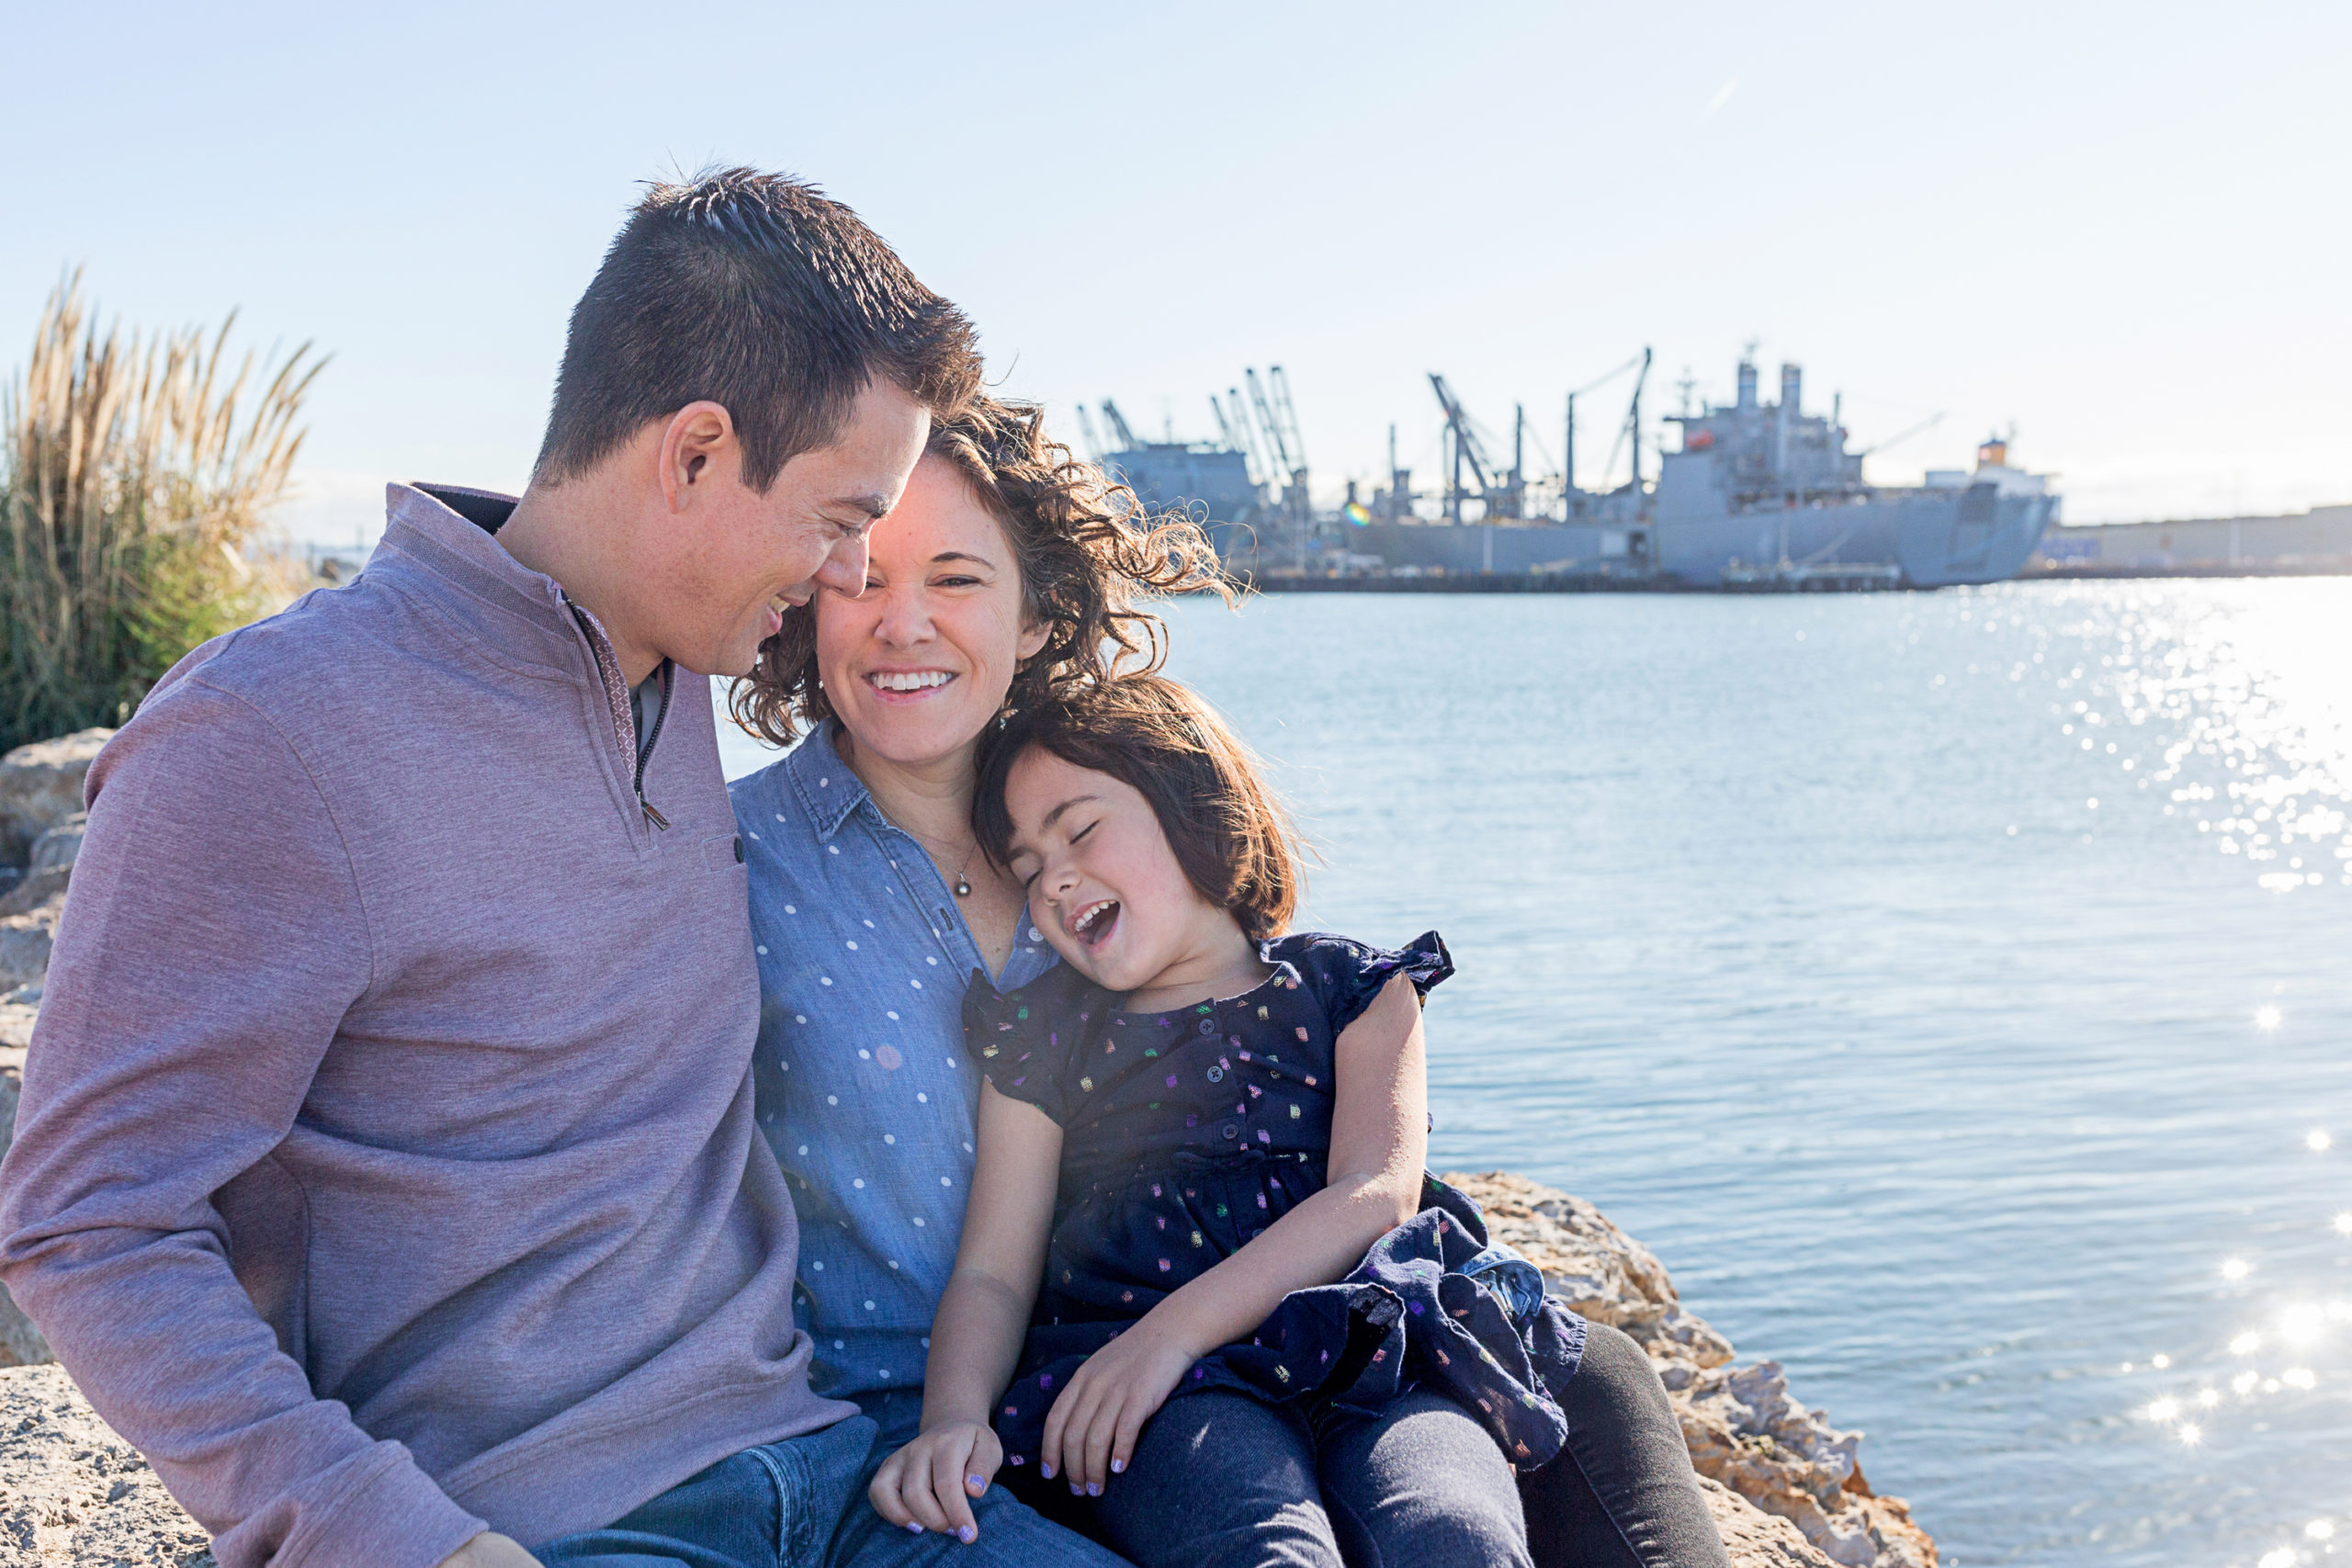 san jose photographer - lifestyle - family - fun - bay area - photography - family of three - ship - water - laughing